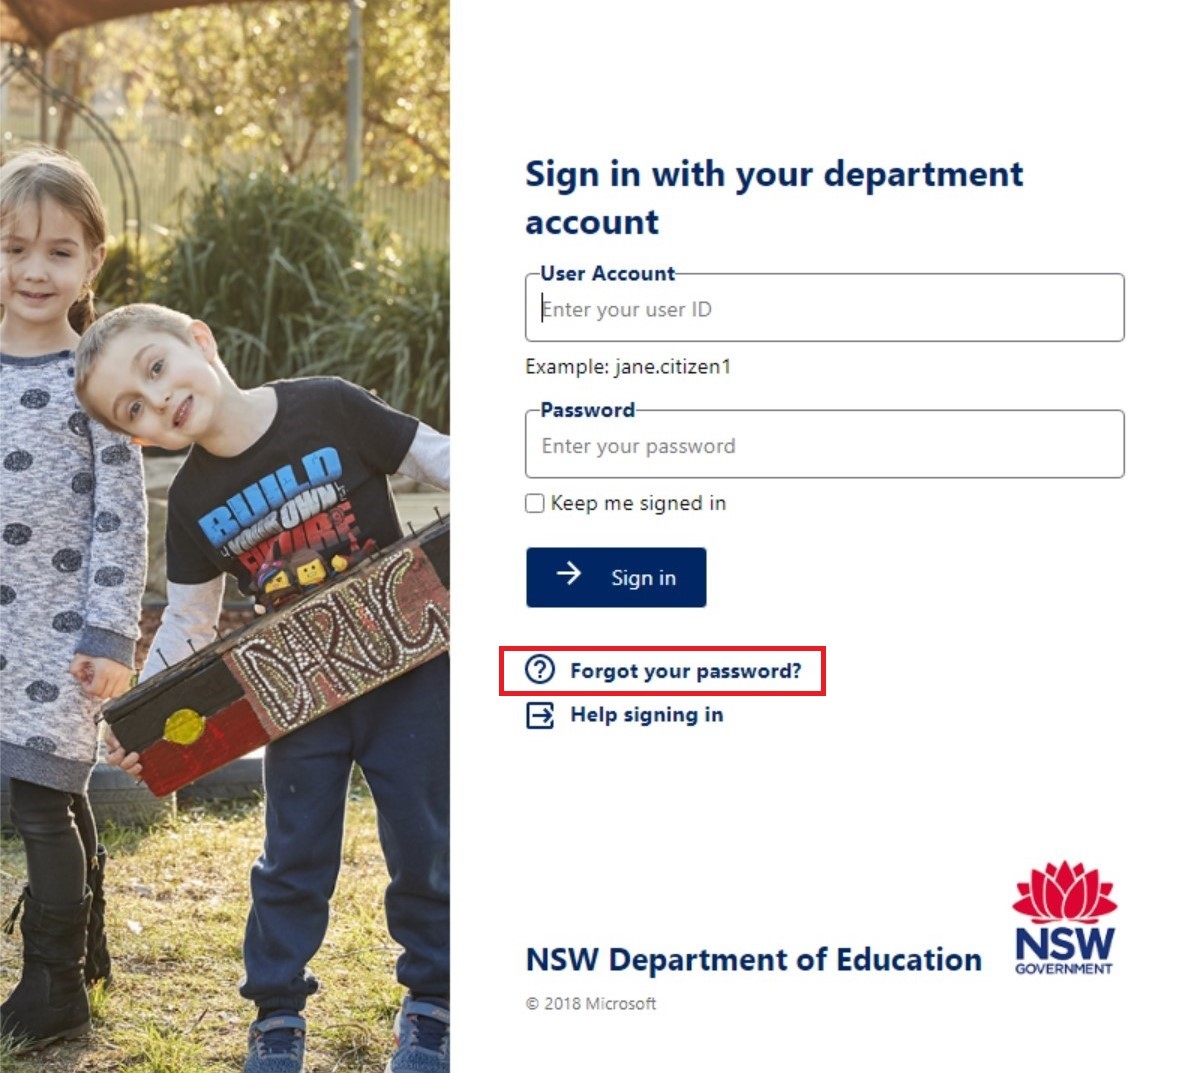 Image of sign in screen for NSW Education department account